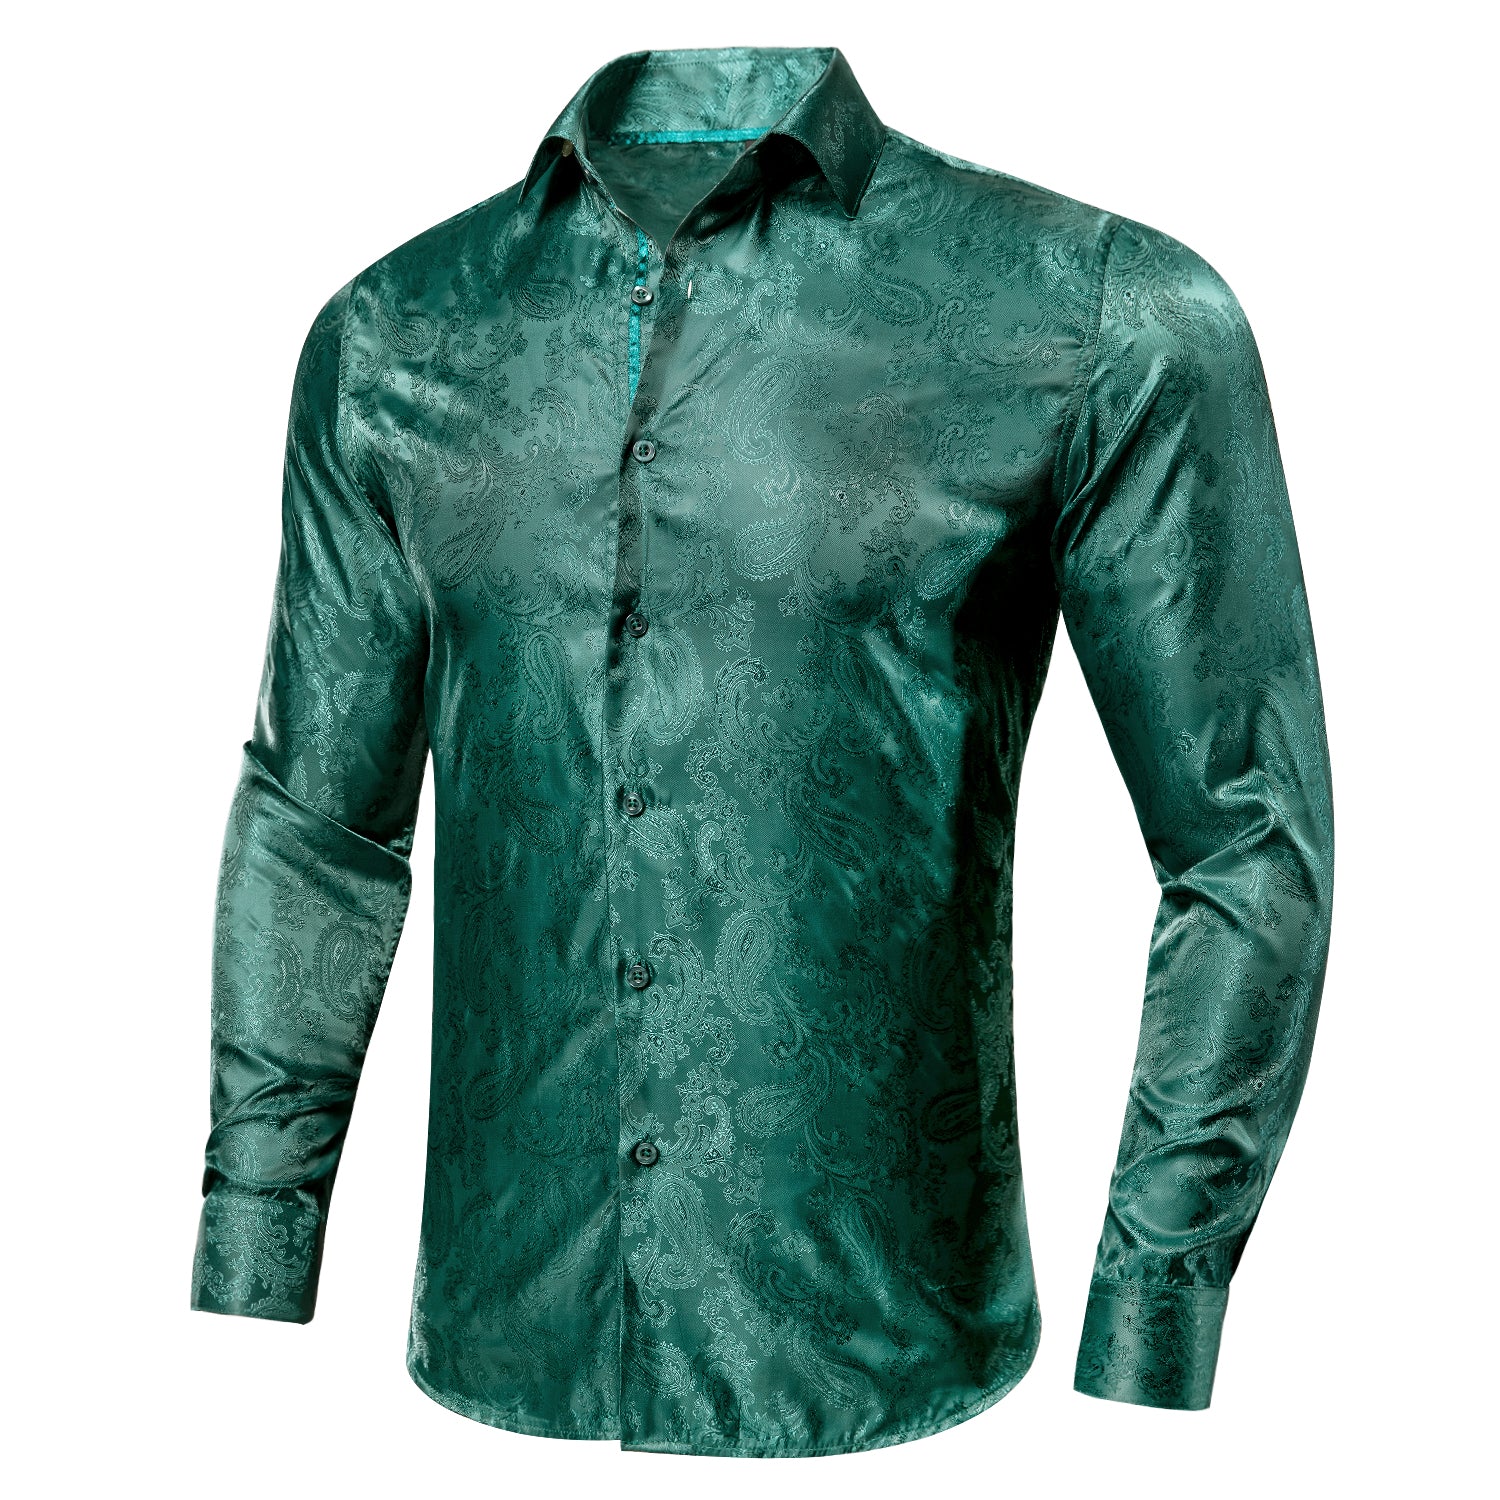 New Arrival Turquoise Green Paisley Silk Men's Shirt